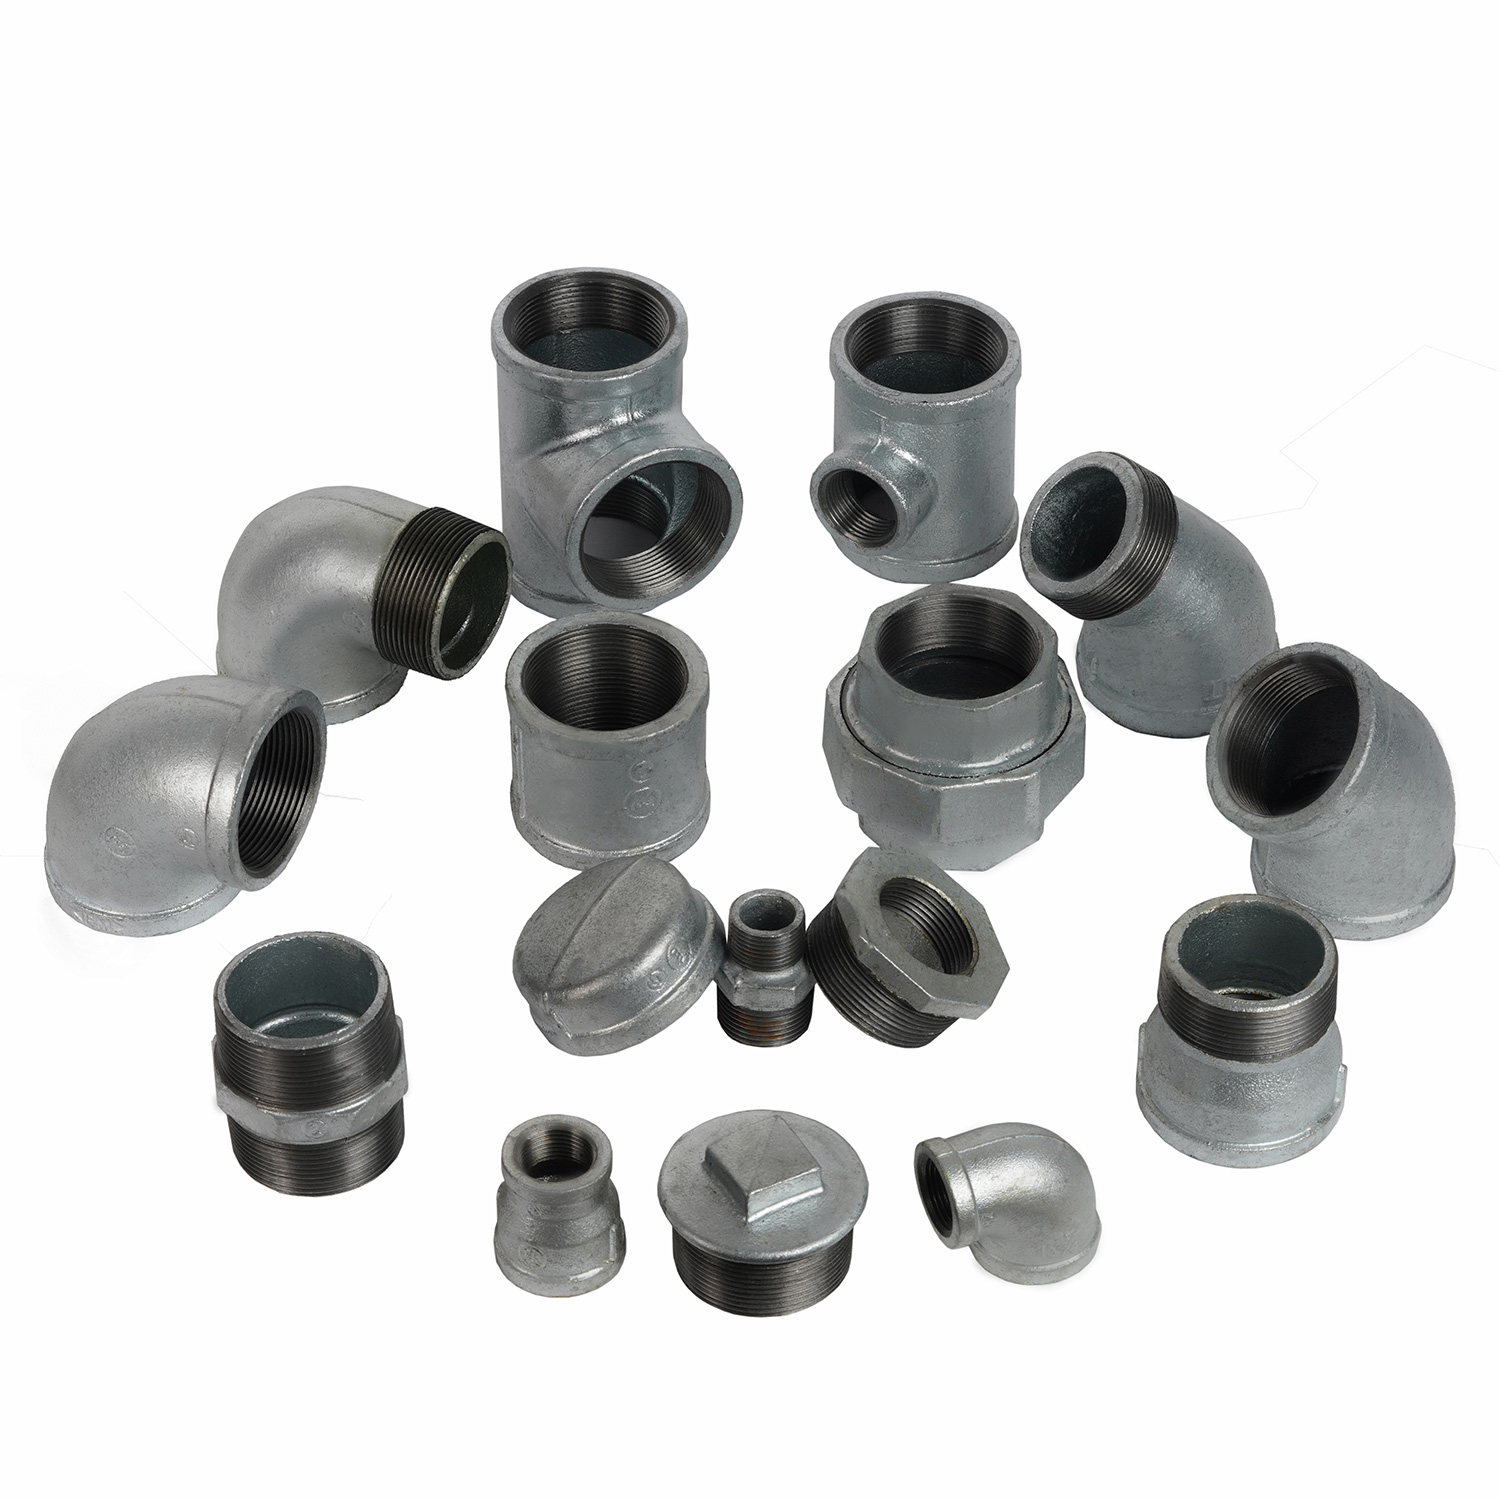 Hot Deep Galvanized Fittings with K Brand